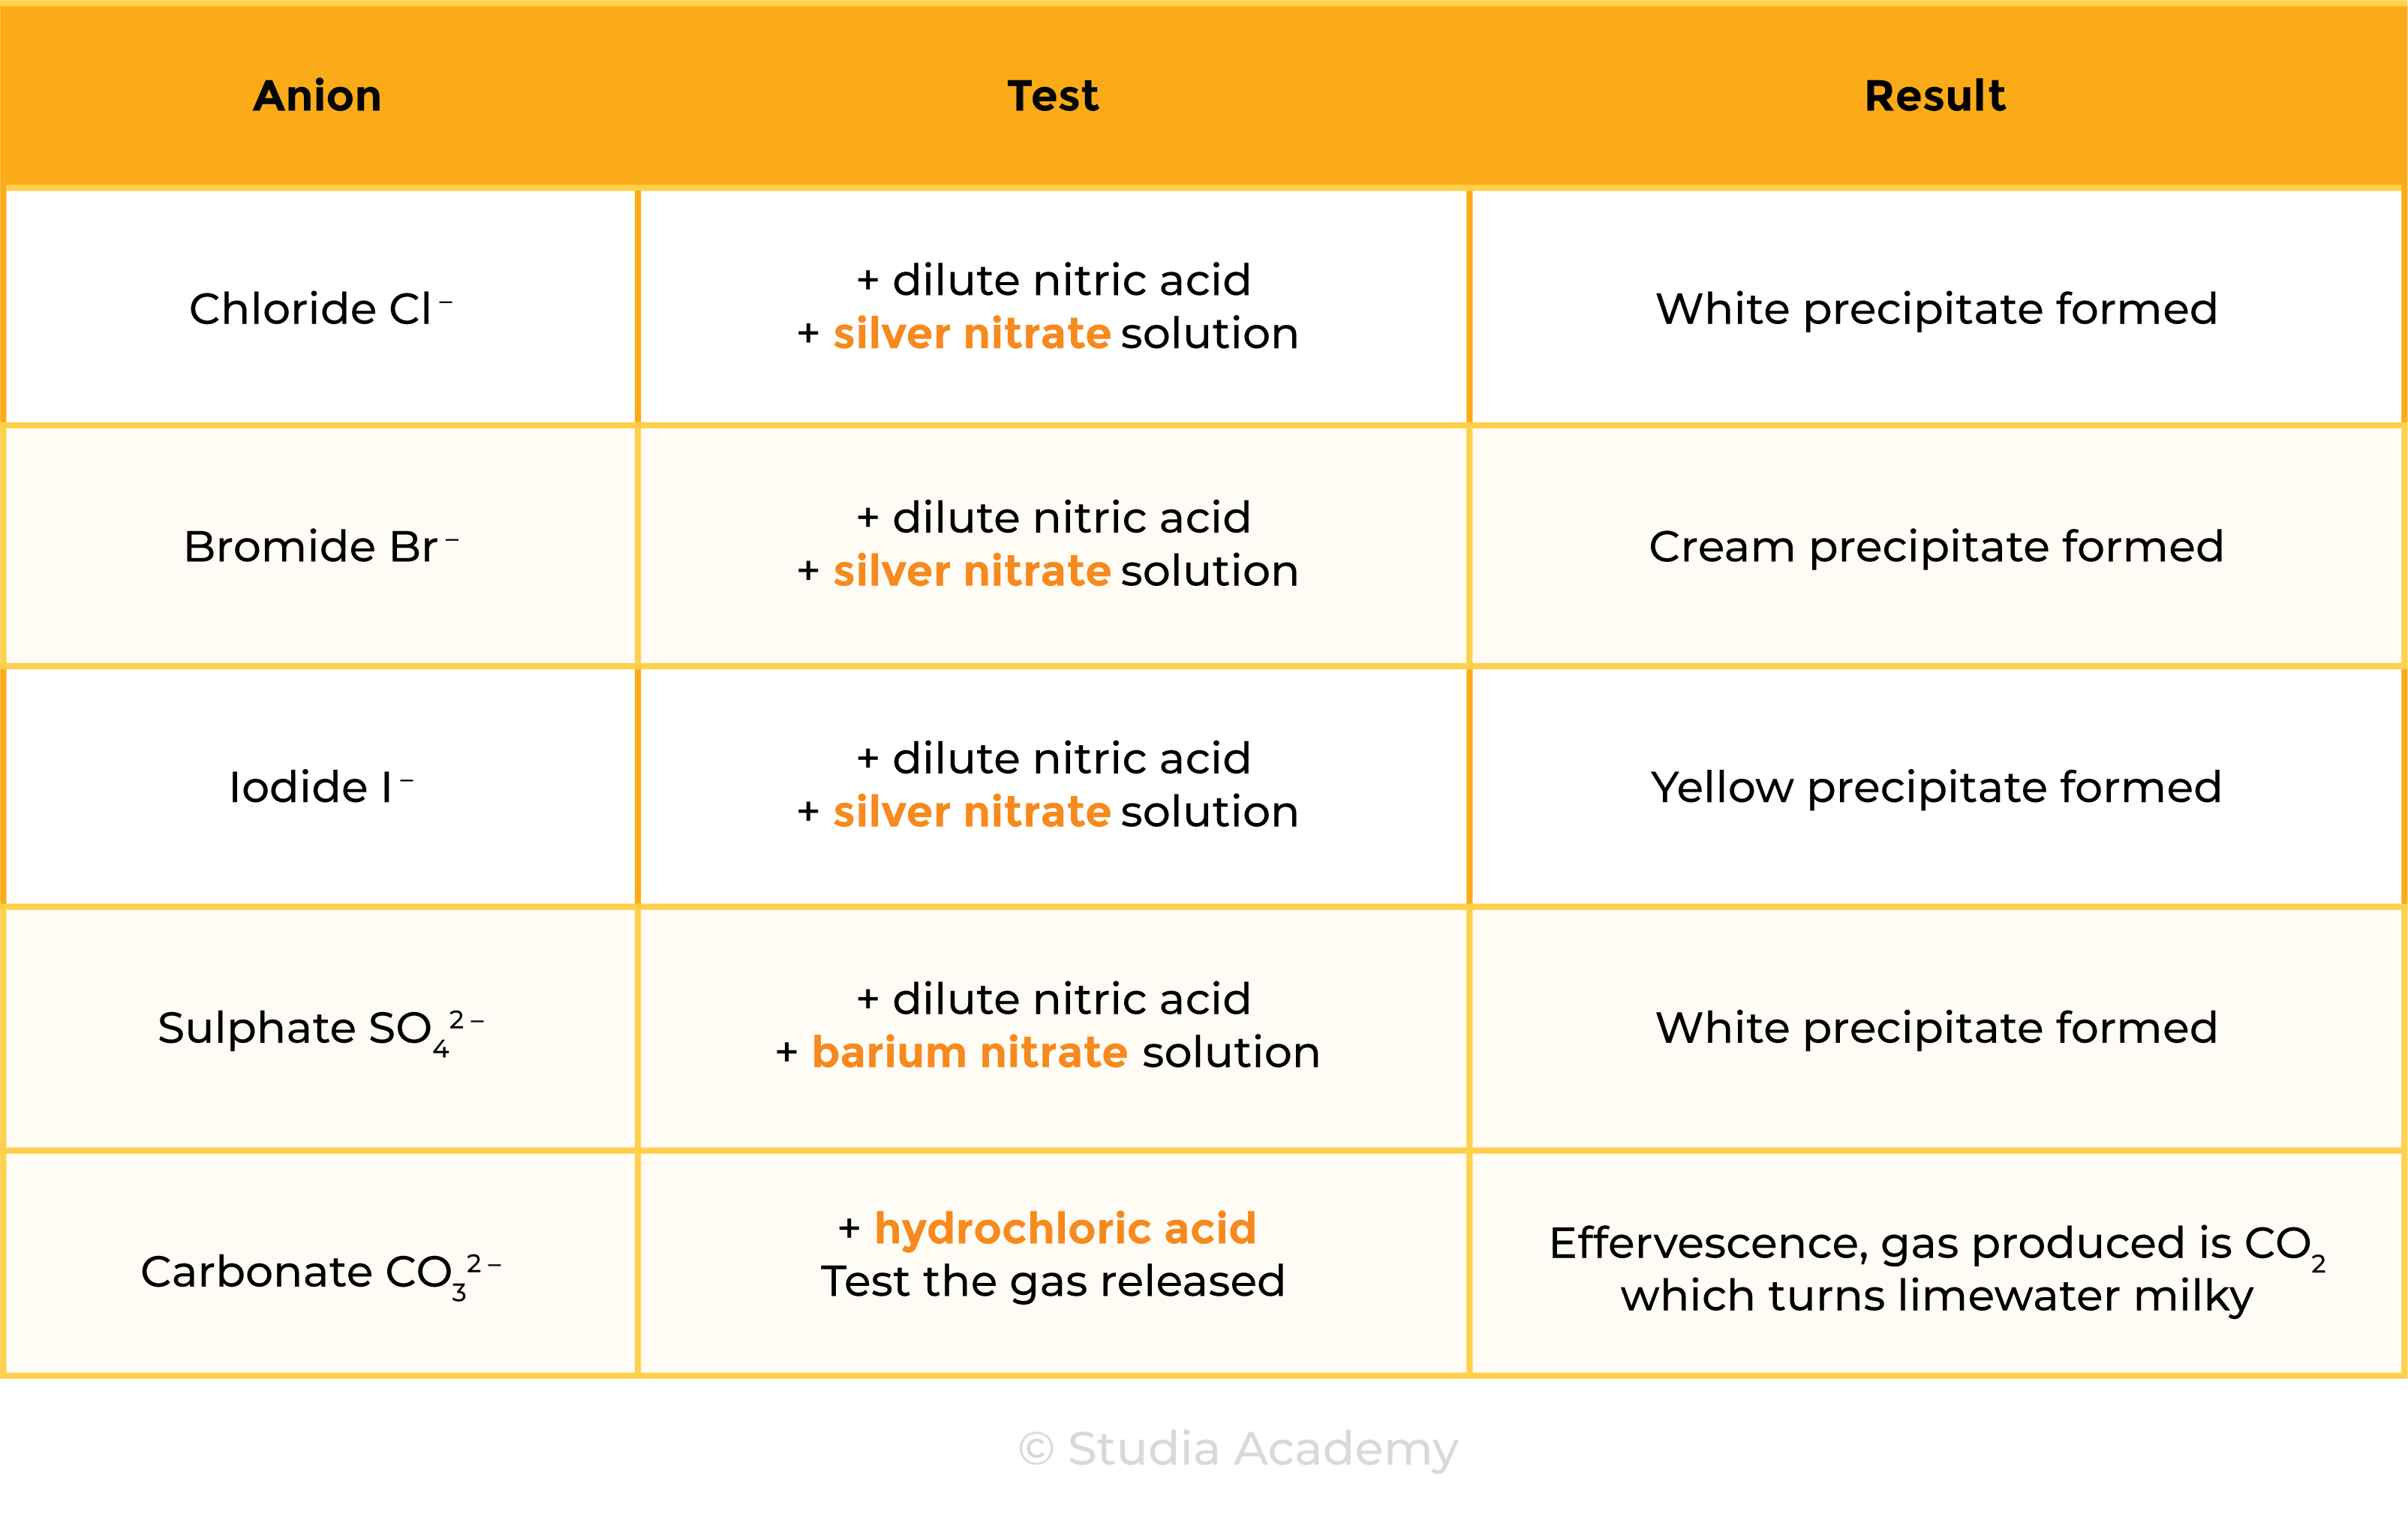 edexcel_igcse_chemistry_topic 17 tables_chemical tests_004_anion tests